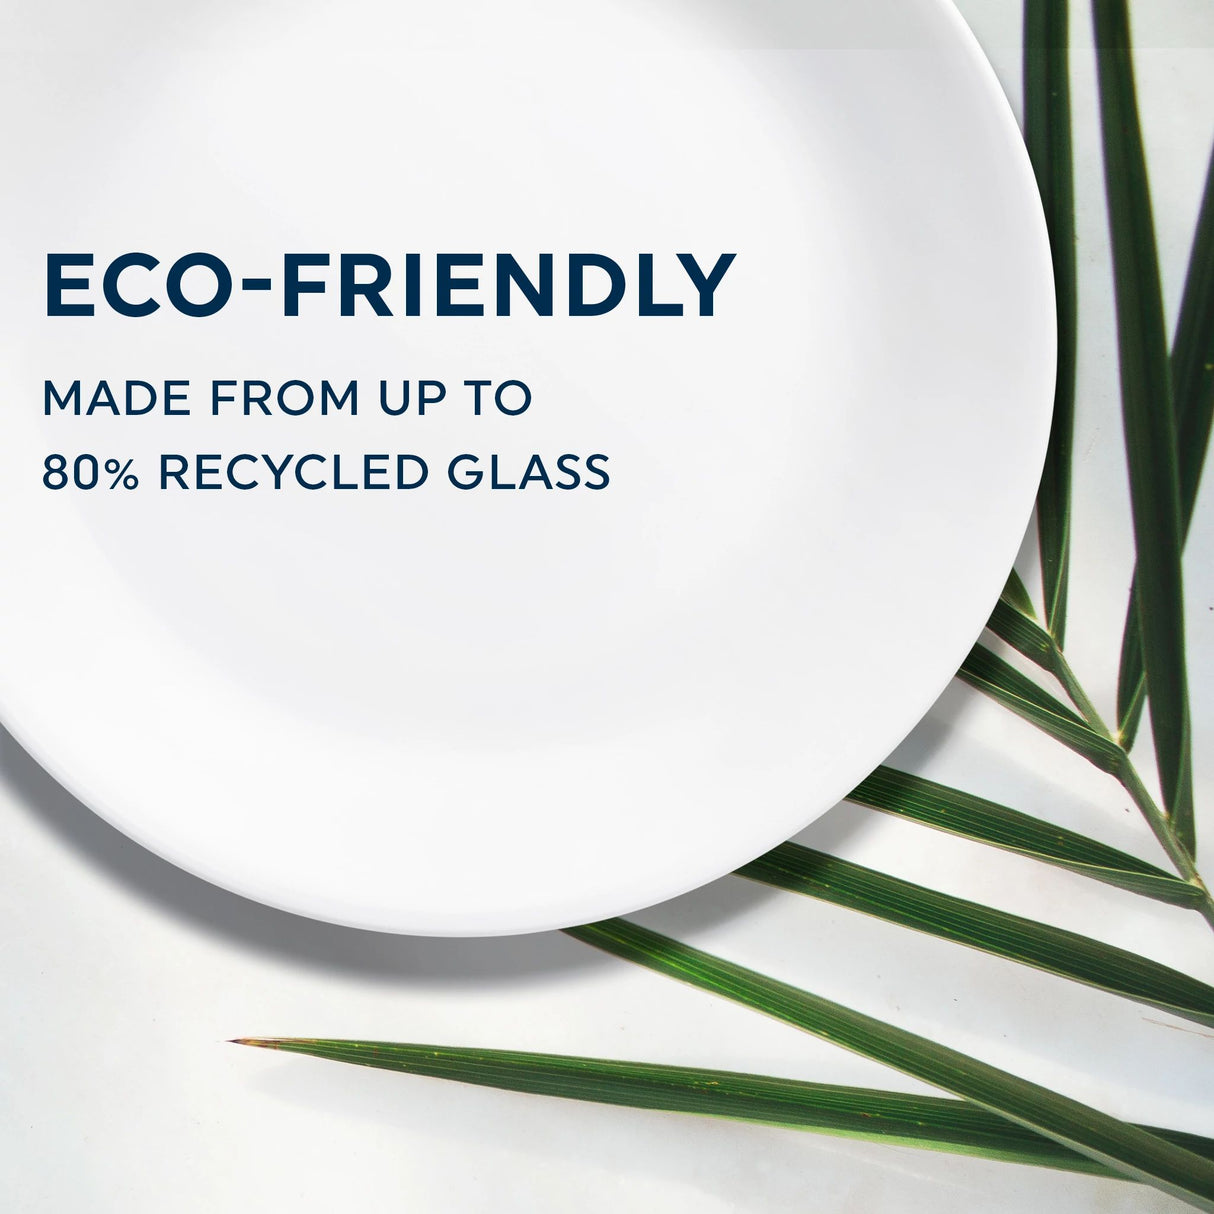  Winter Frost White Dinner Plates with text on photo eco-friendly made from up to 80% recycled glass